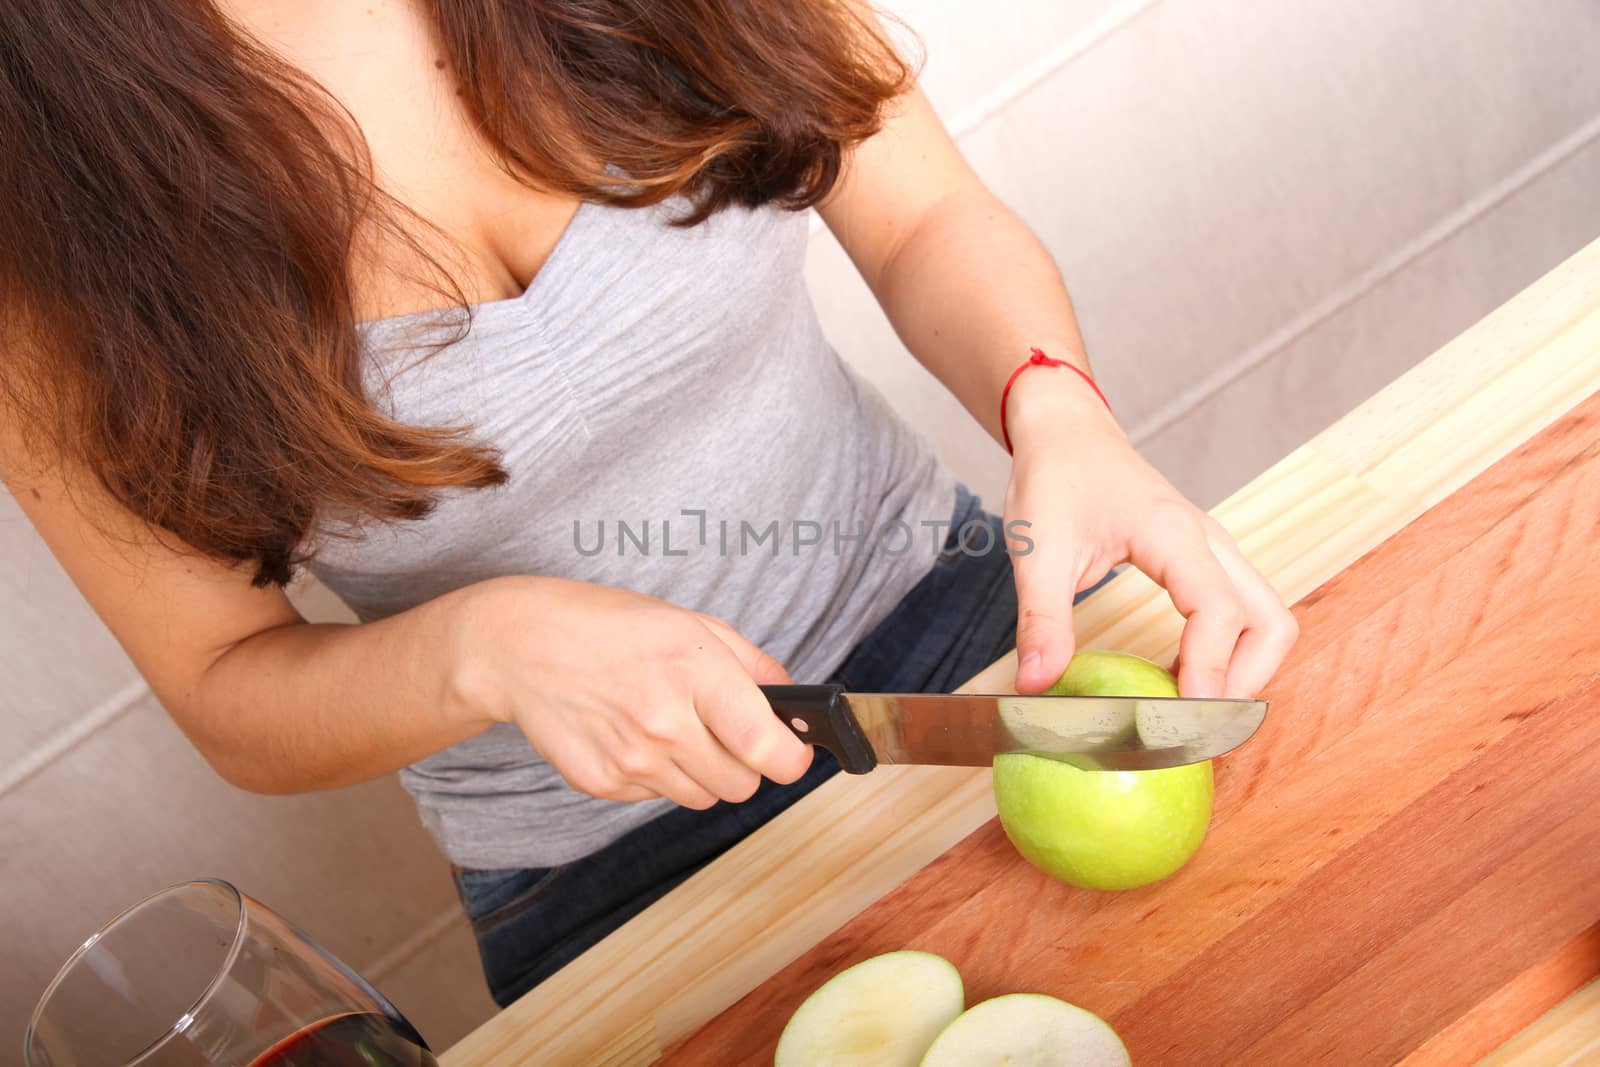 Cutting a Apple	 by Spectral